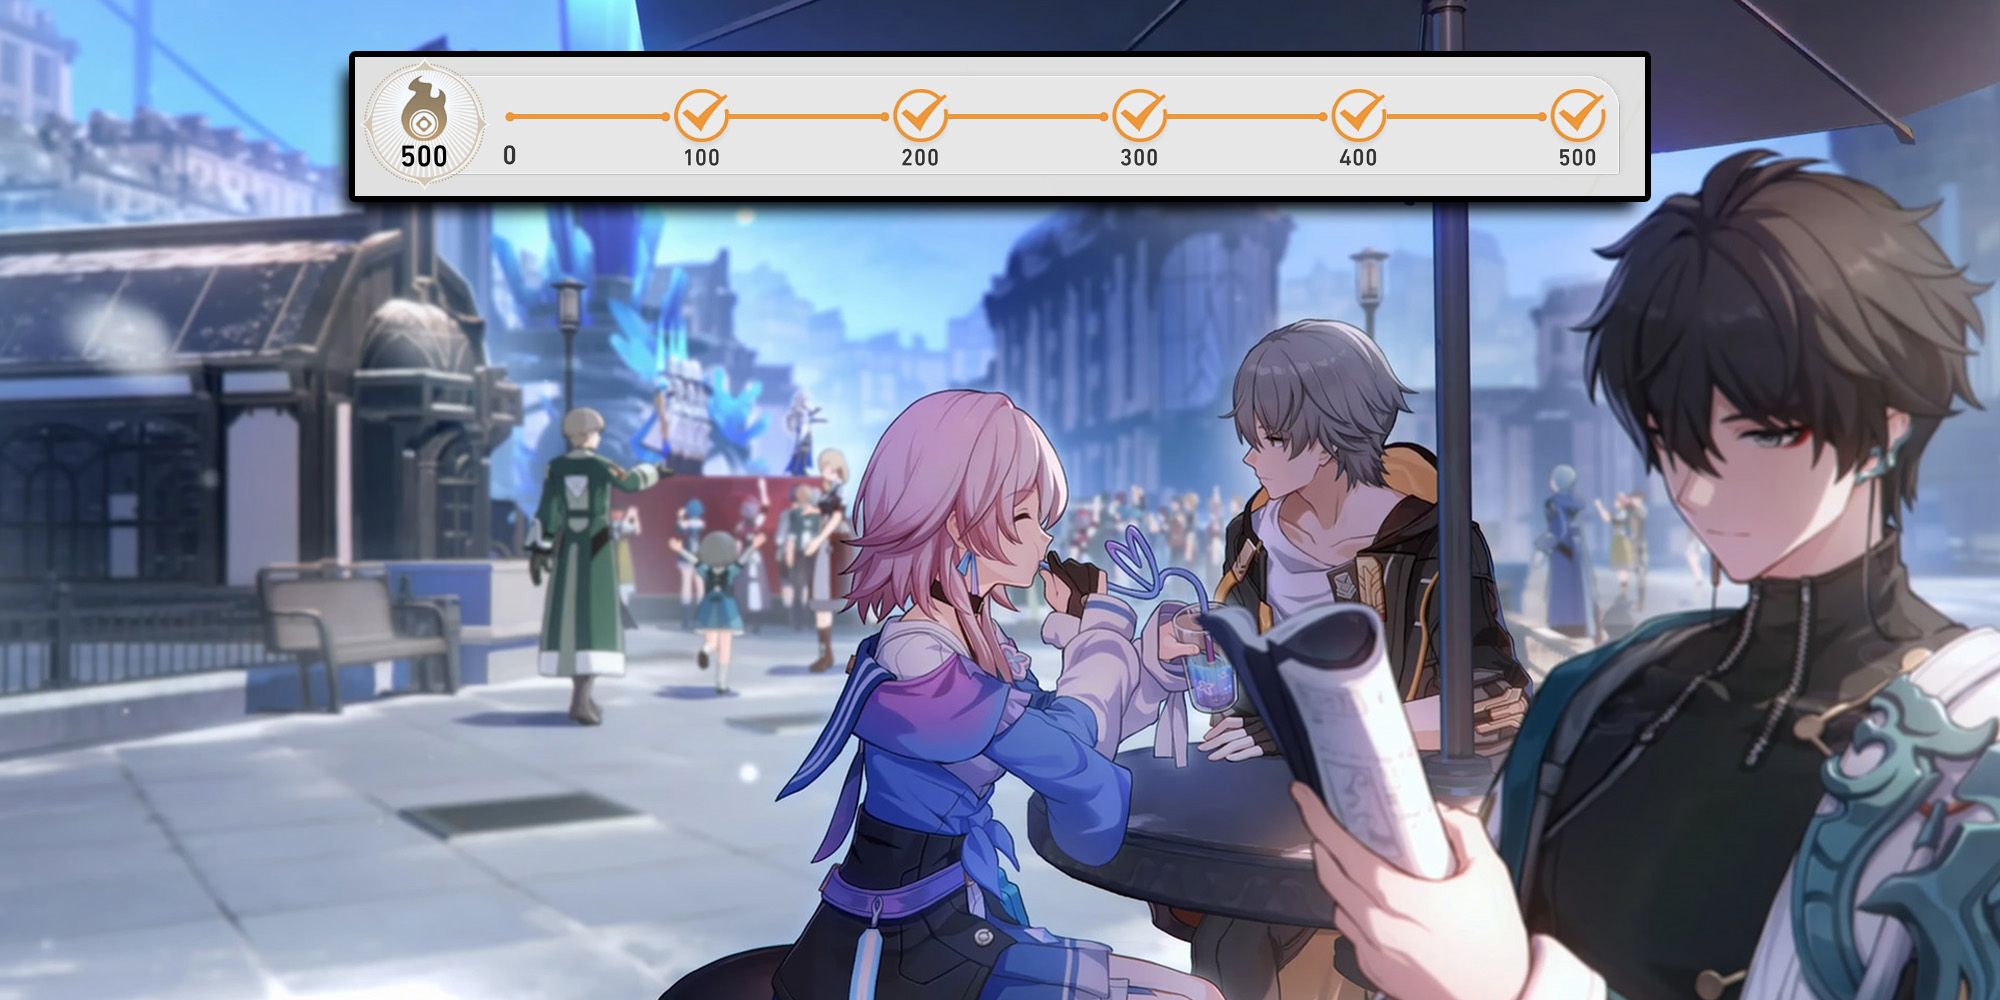 Honkai Star Rail - Cutscene Of March 7th, Dan Heng, and the Trailblazer Relaxing In Belobog With Daily Training UI On Top